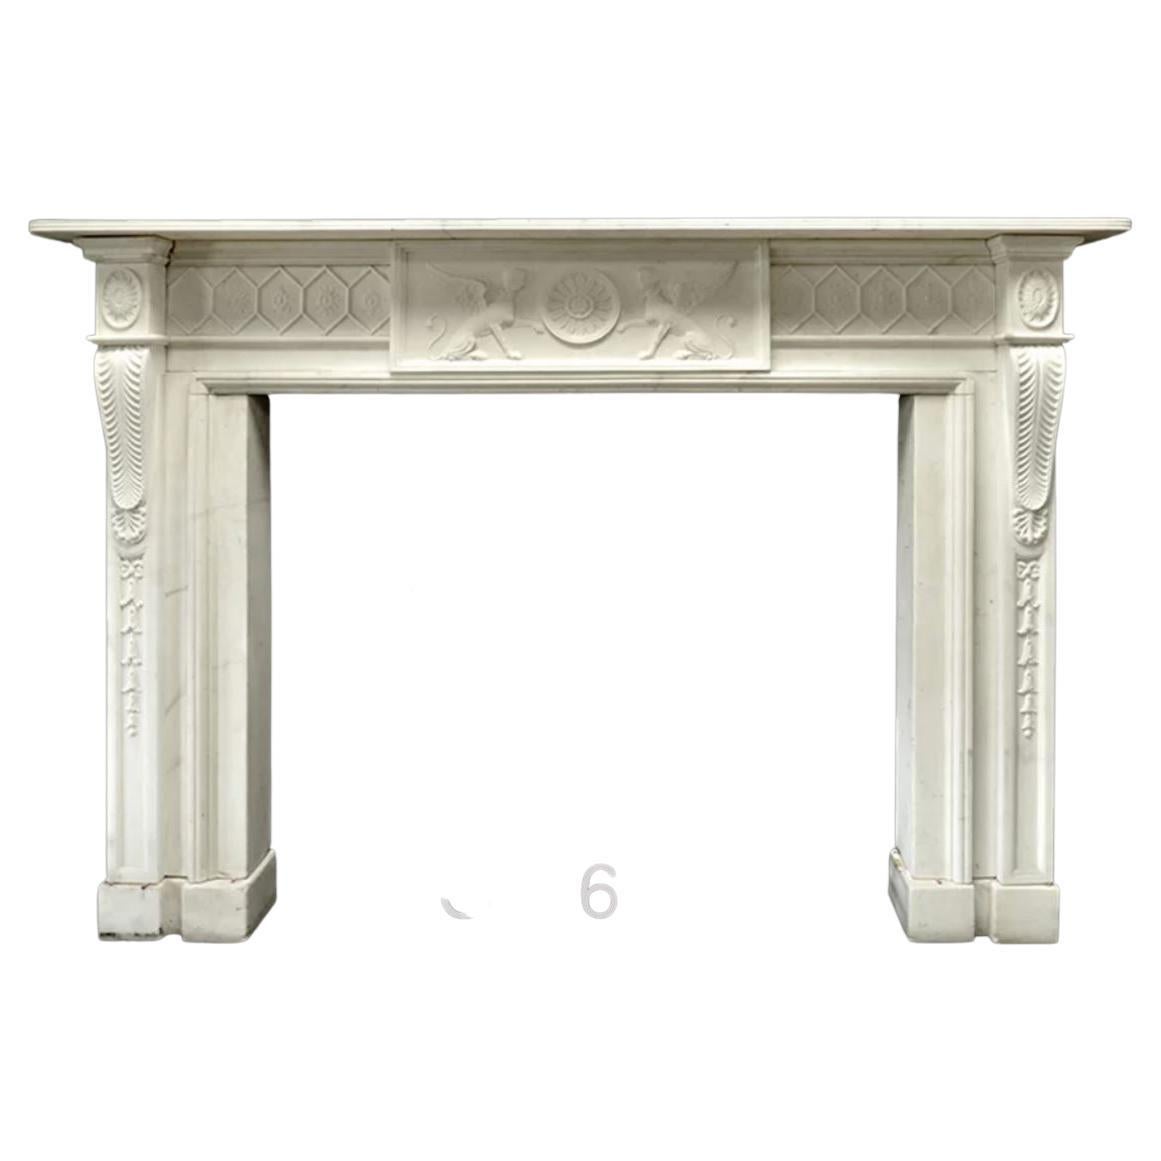 Refined Adam Period Chimneypiece Carved in White Statuary Marble For Sale